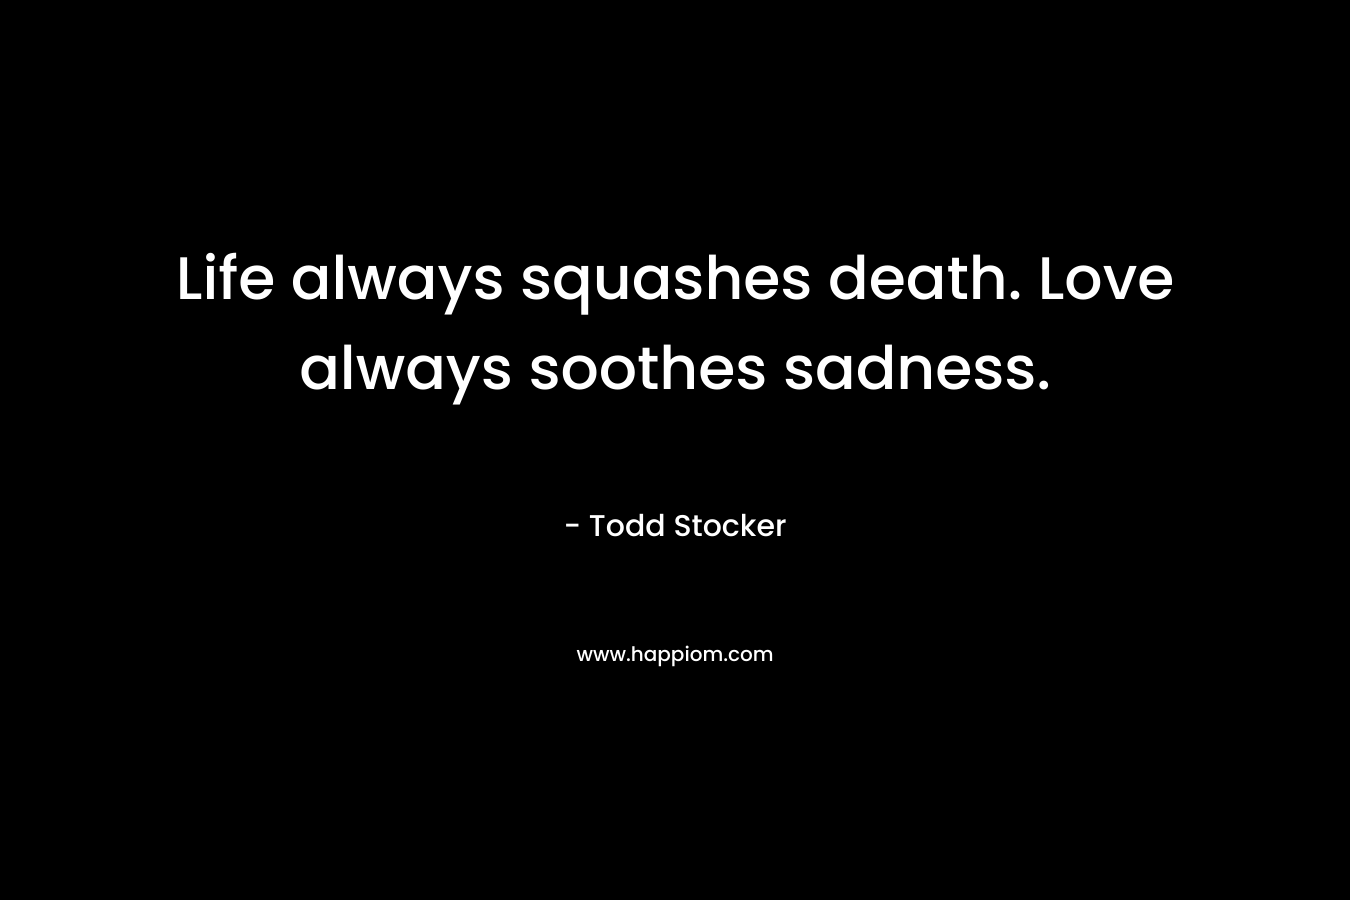 Life always squashes death. Love always soothes sadness.